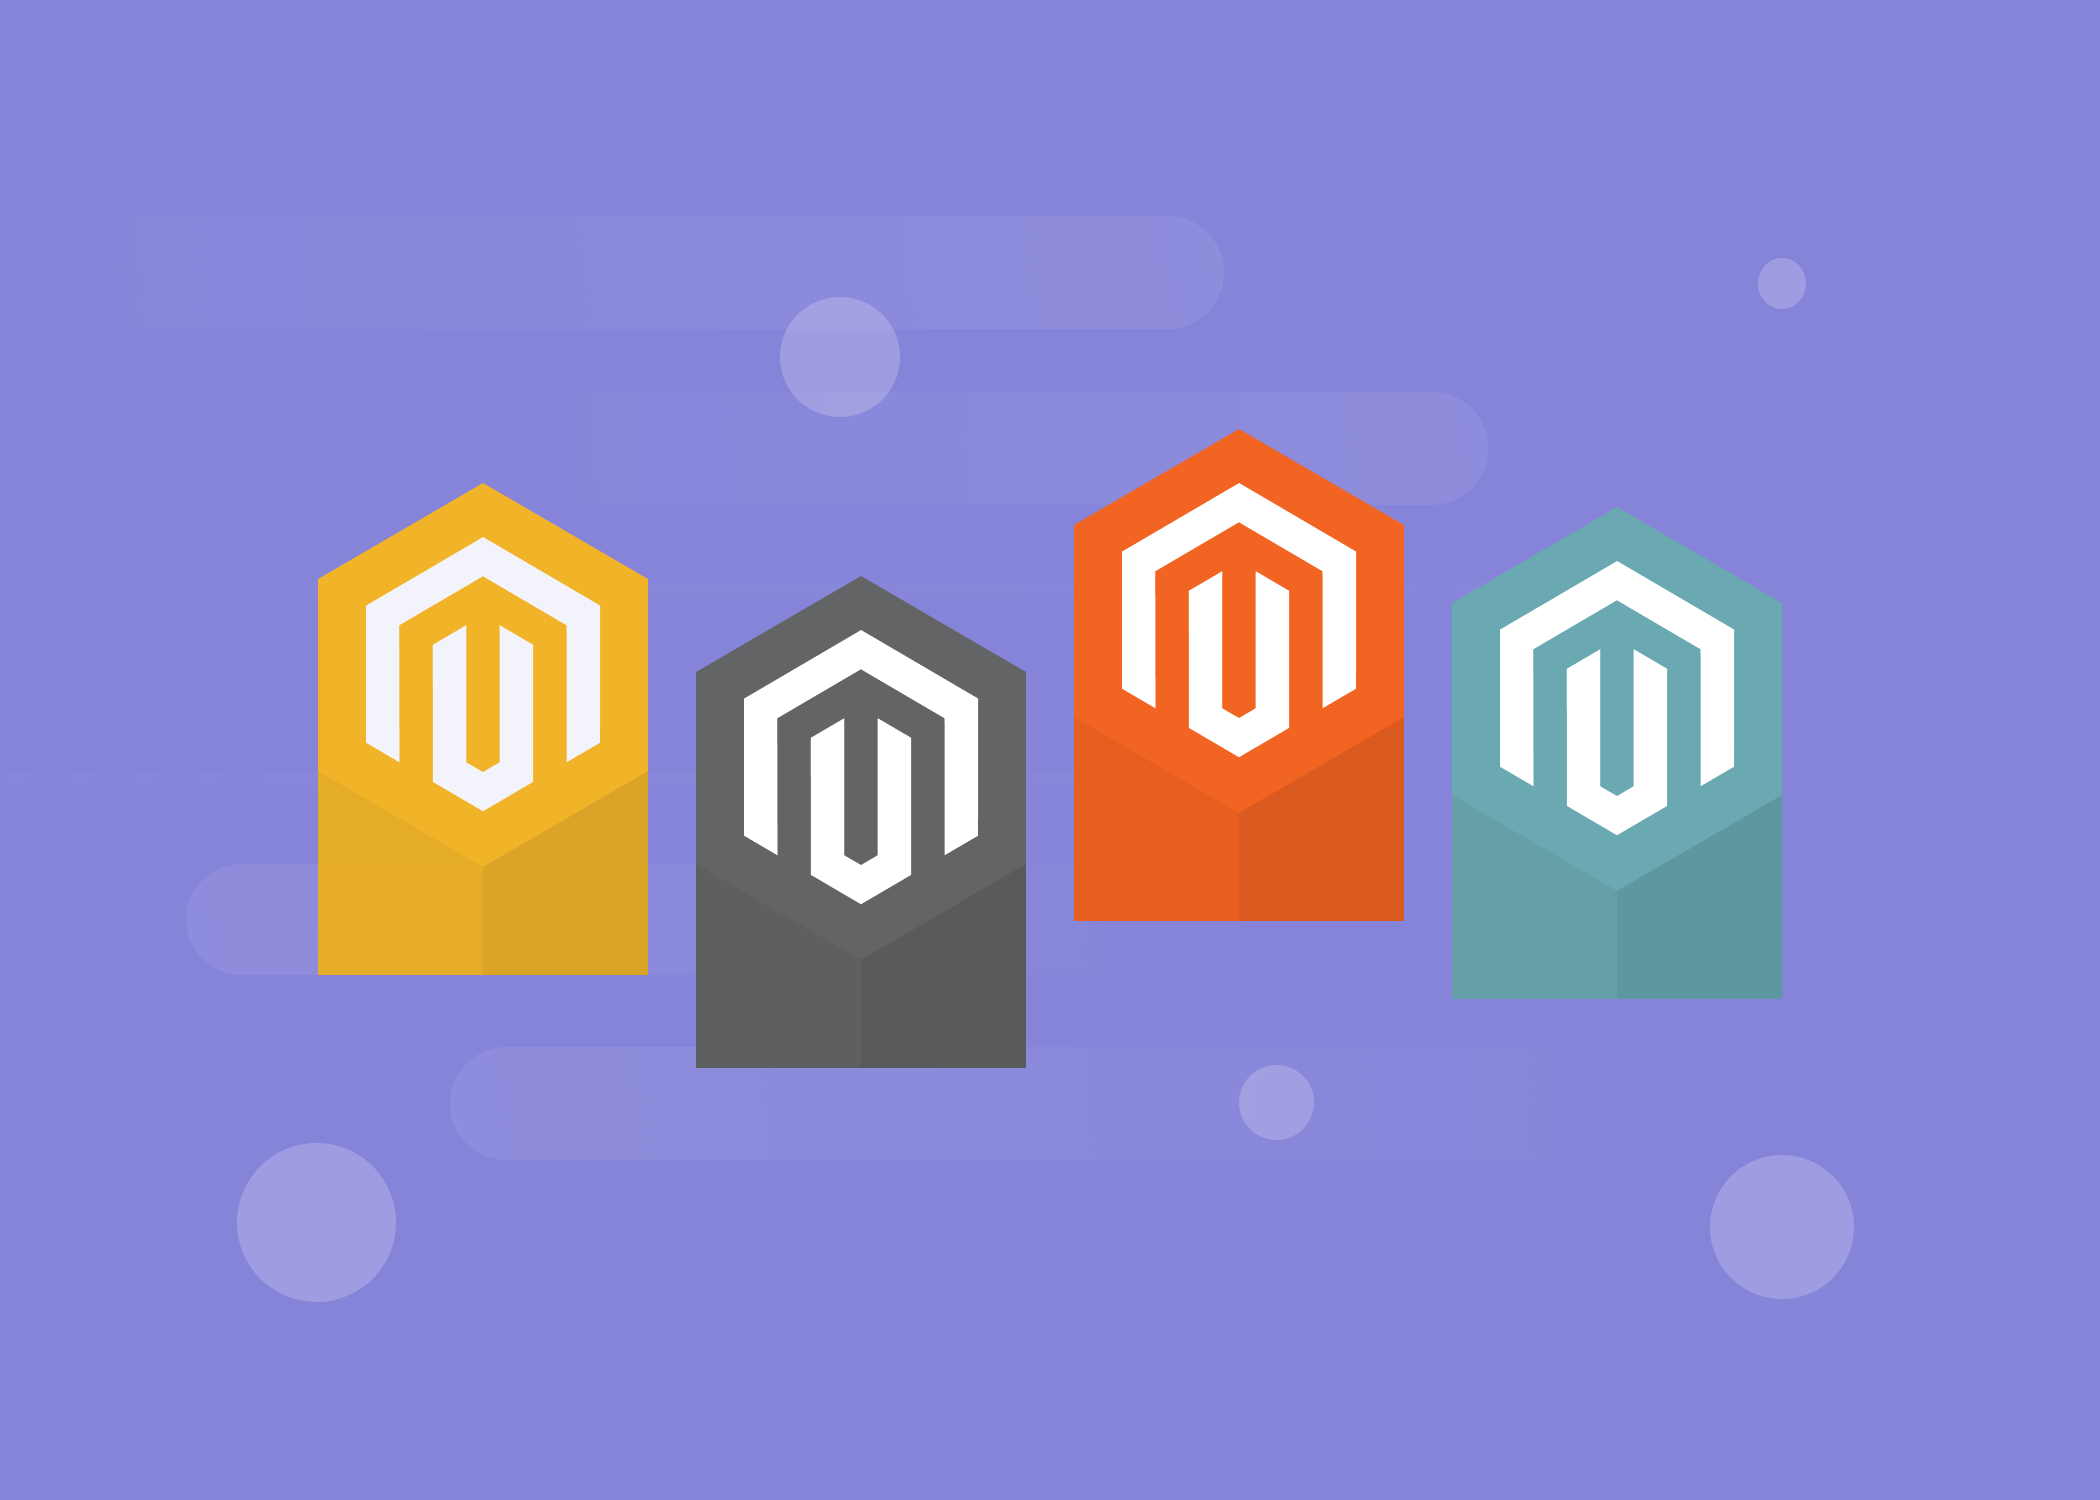 Magento Certifications: How to Become a Magento Certified Developer in 2022